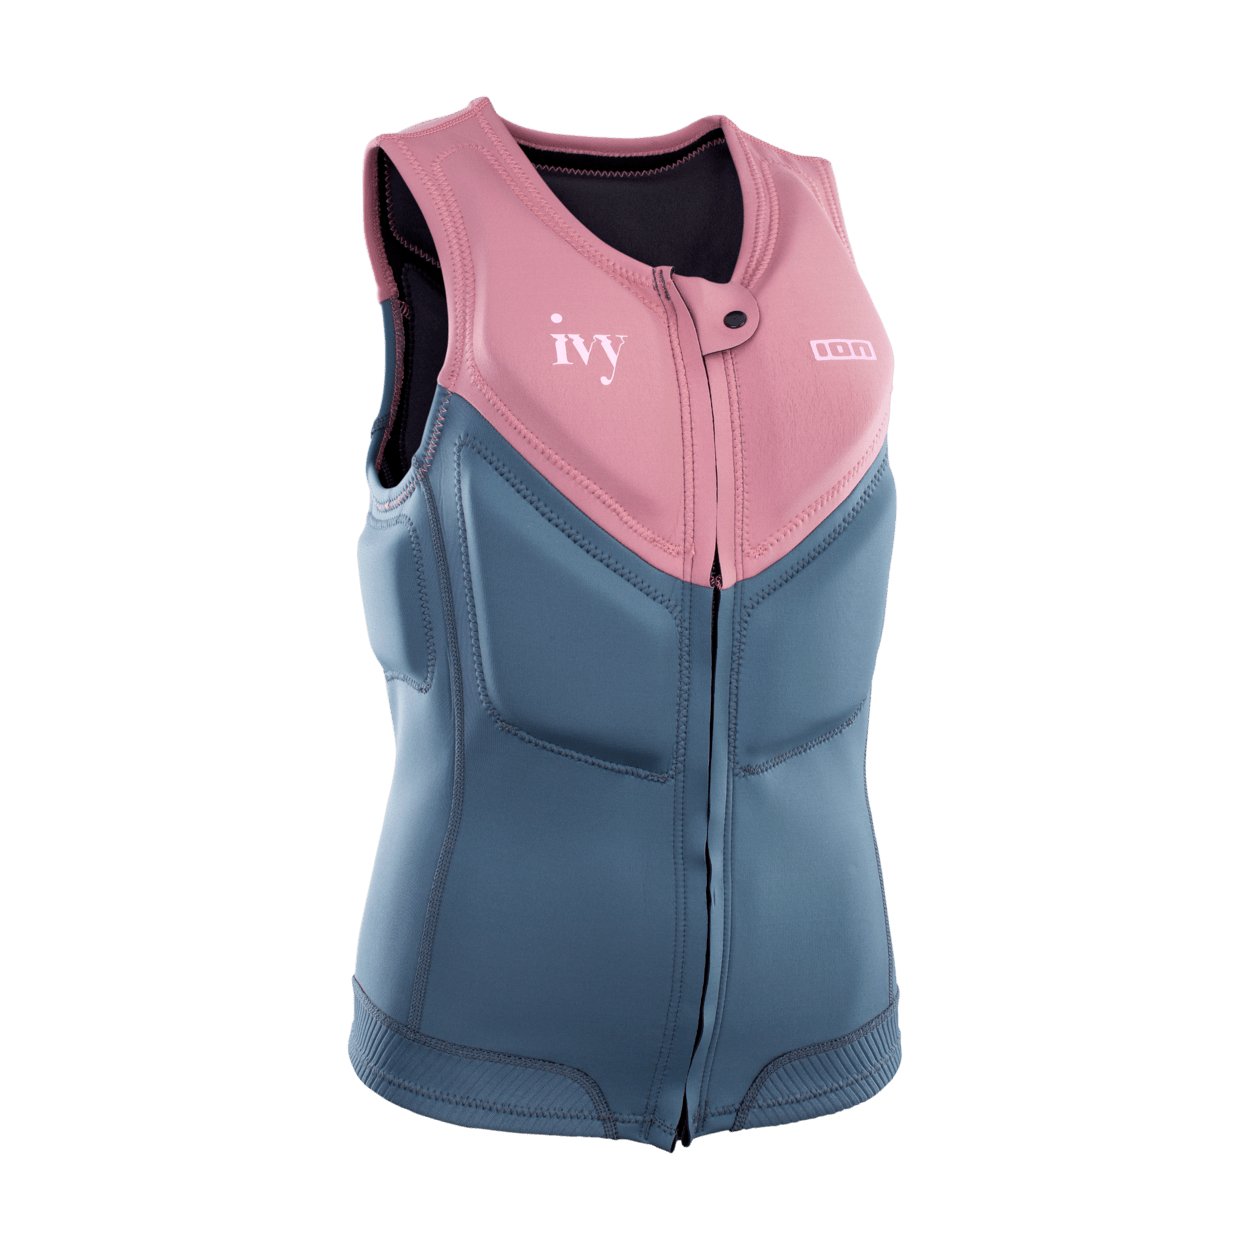 ION Ivy Vest Front Zip 2023 - Worthing Watersports - 9010583051949 - Protection - ION Water